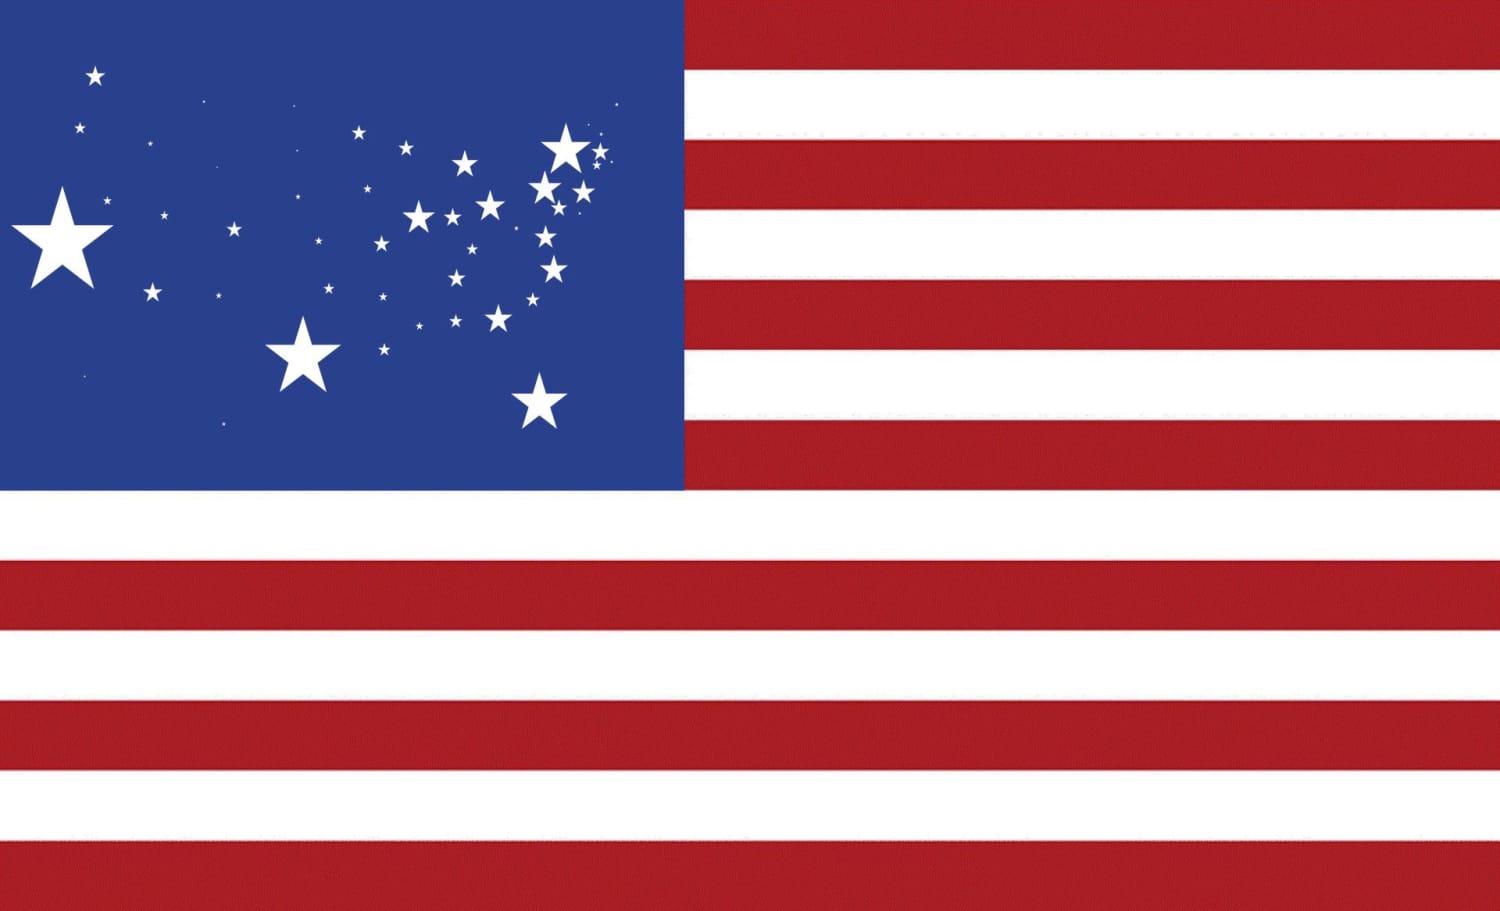 U.S. Flag but each star is scaled proportionally to their state’s population, in roughly it’s geographical position.